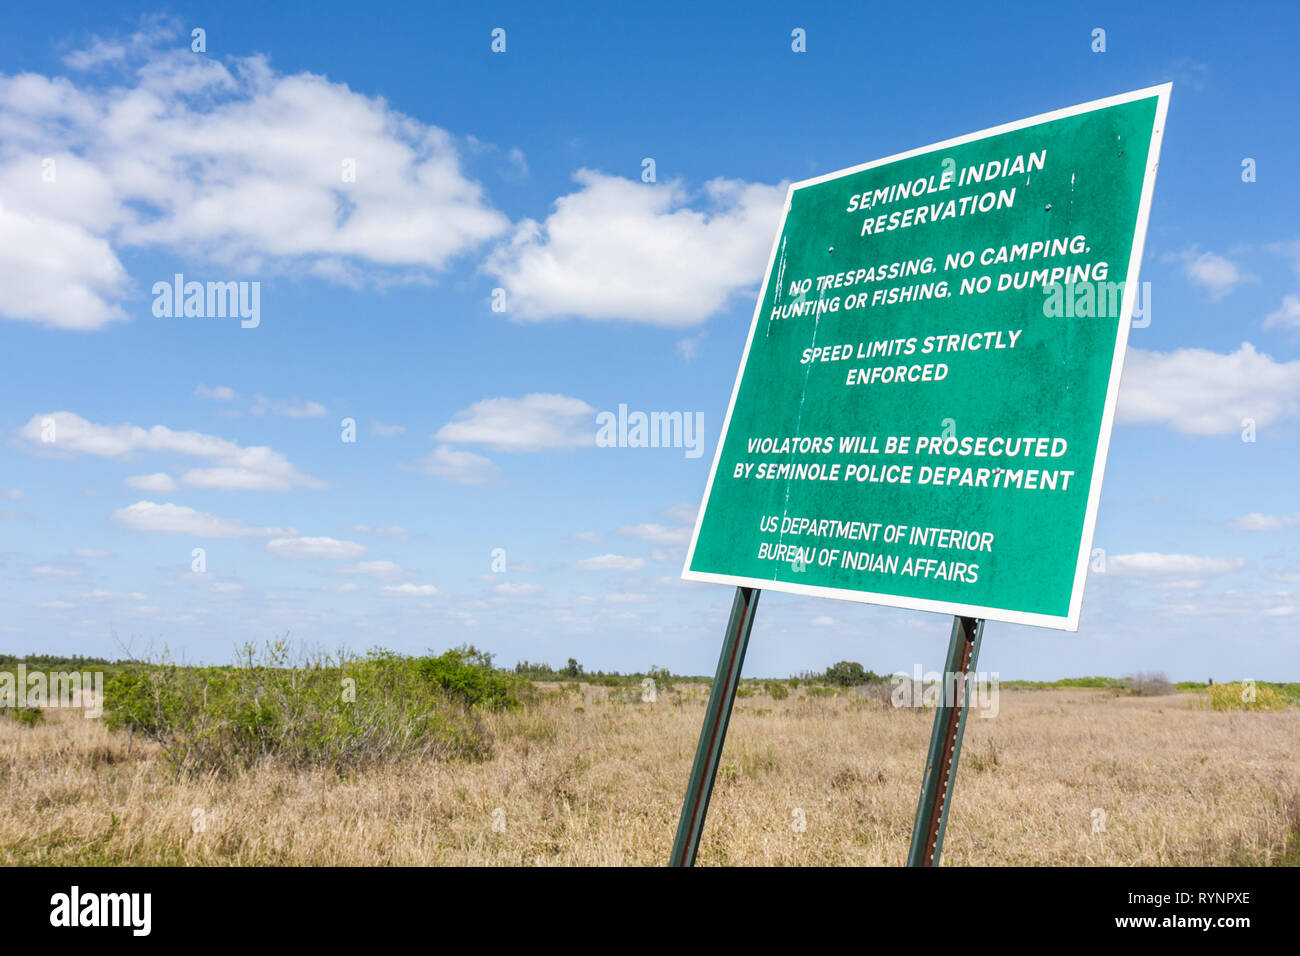 Florida Hendry County,Big Cypress,Seminole Indian Reservation,Native American Indian indigenous peoples,tribe,sign,green,no trespassing,speed limit,wa Stock Photo